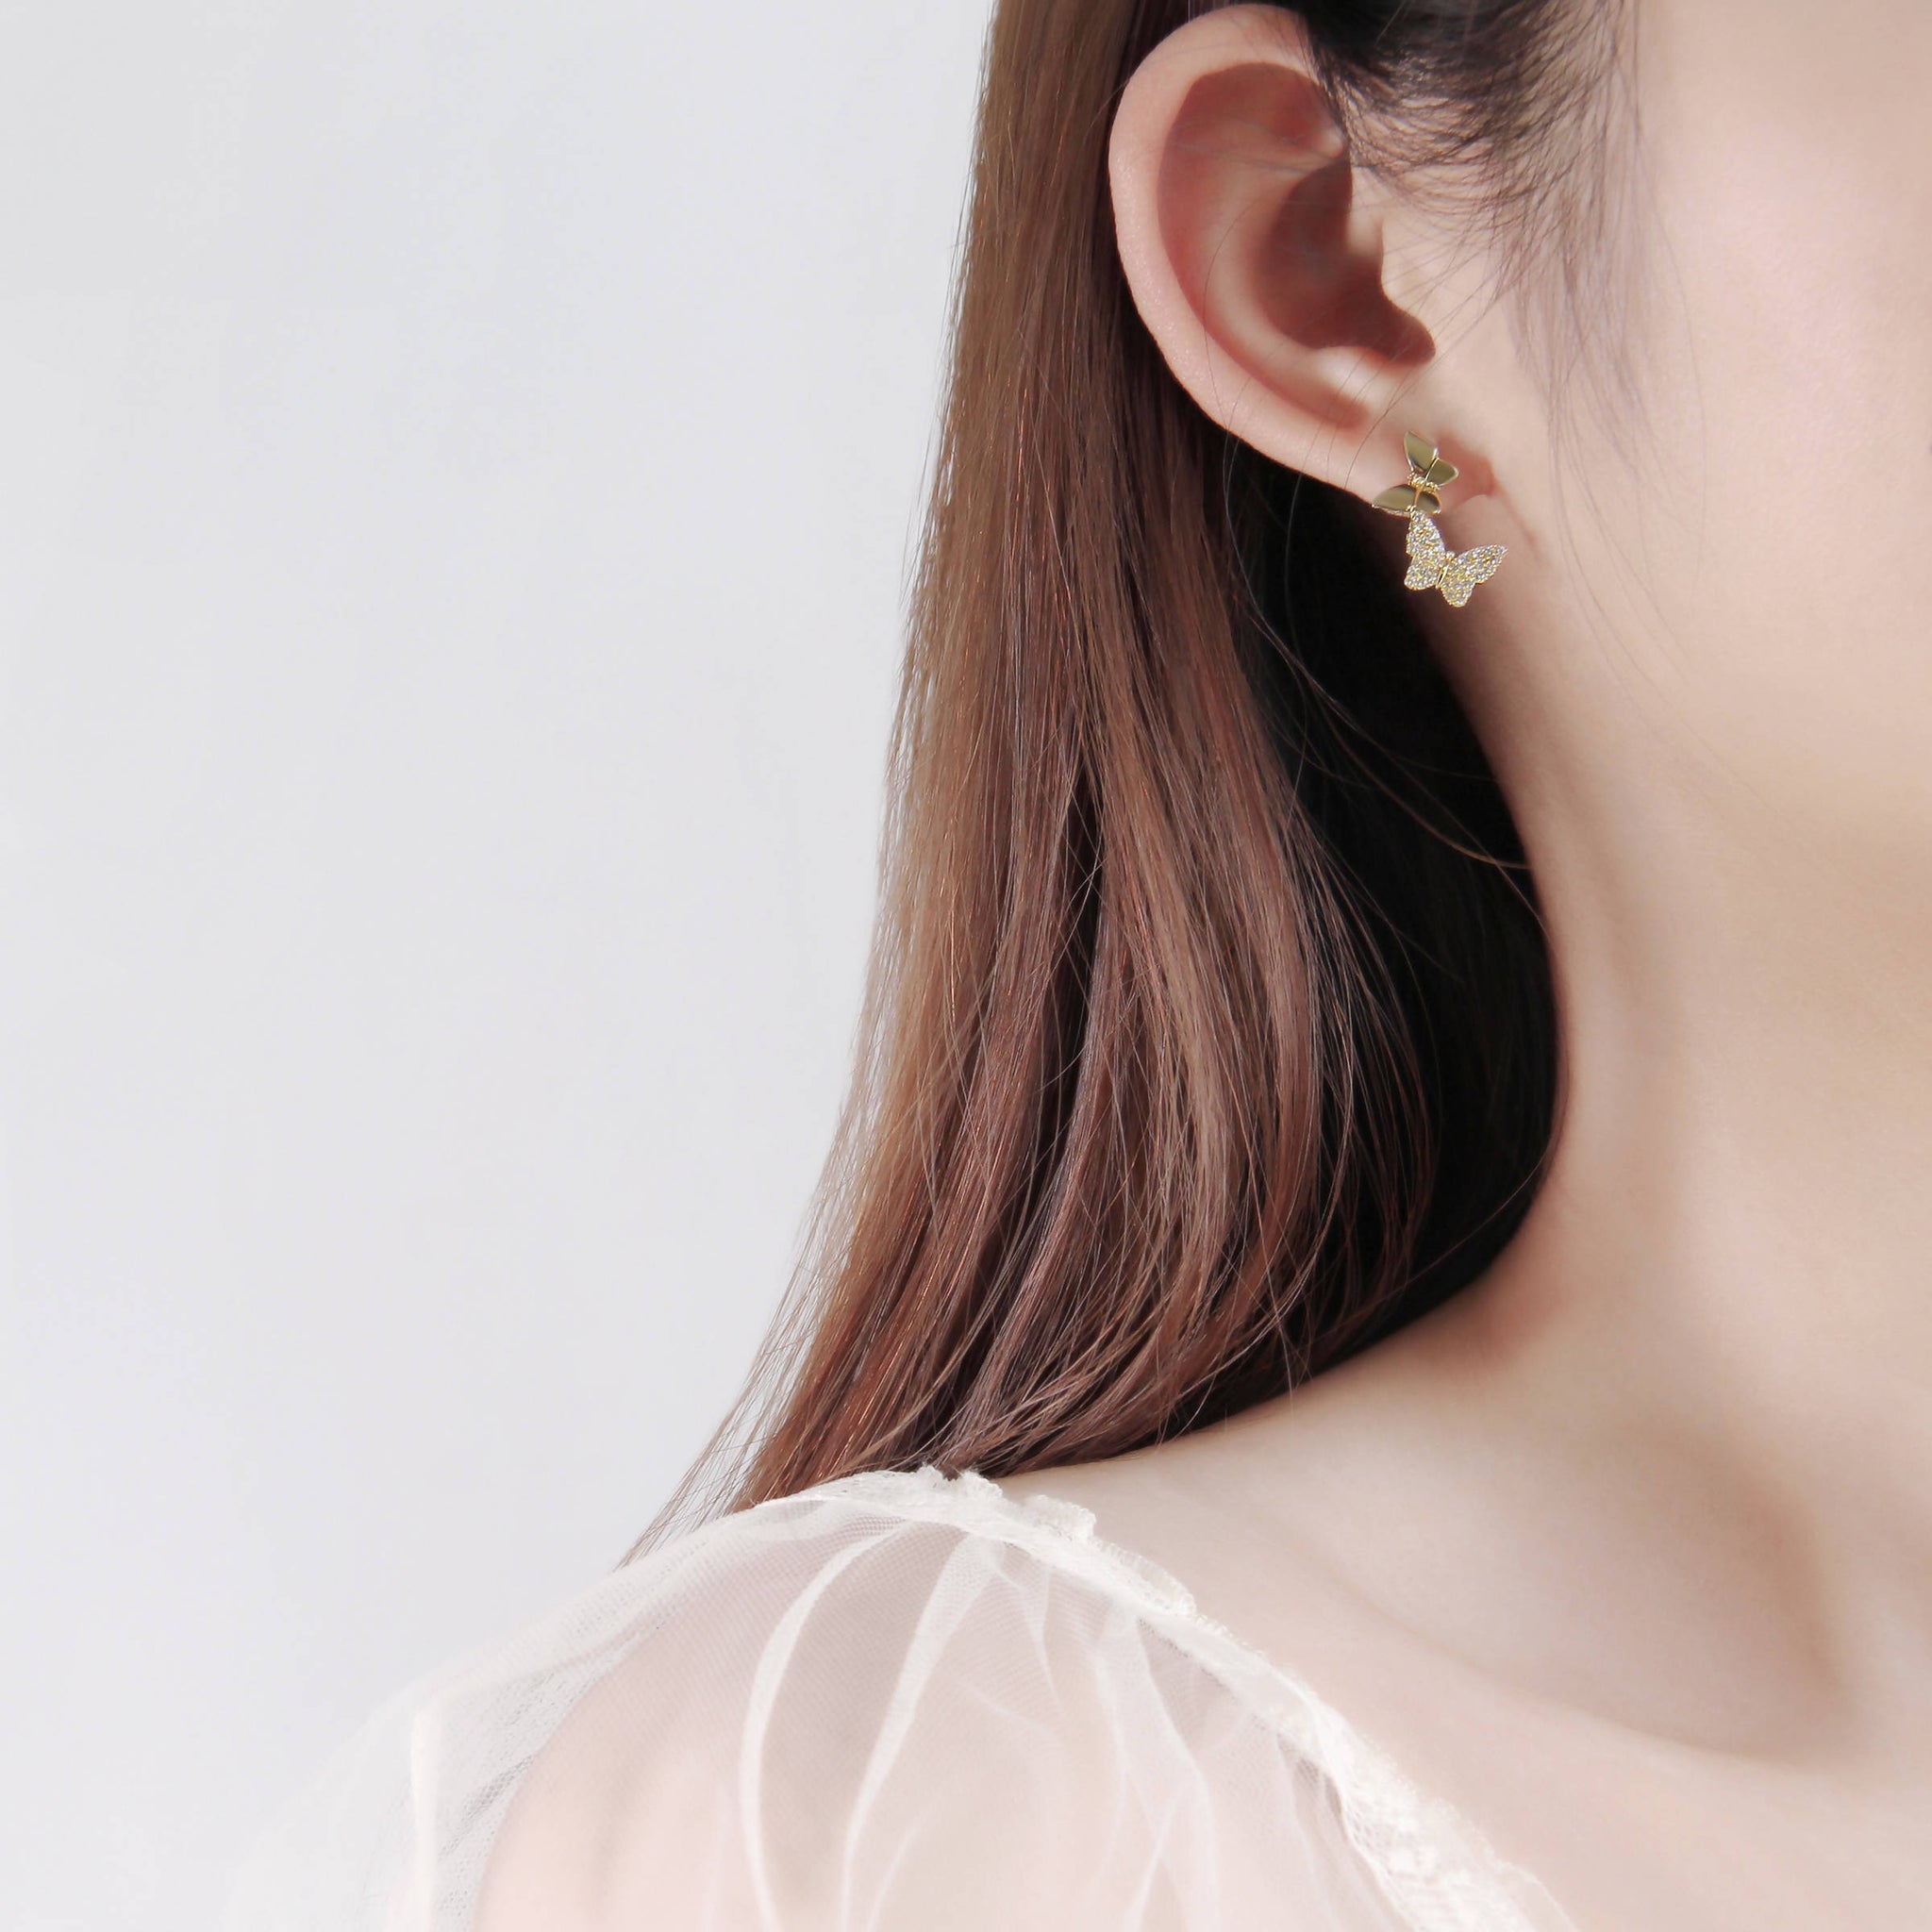 Buy White Earrings for Women by Hot And Bold Online | Ajio.com